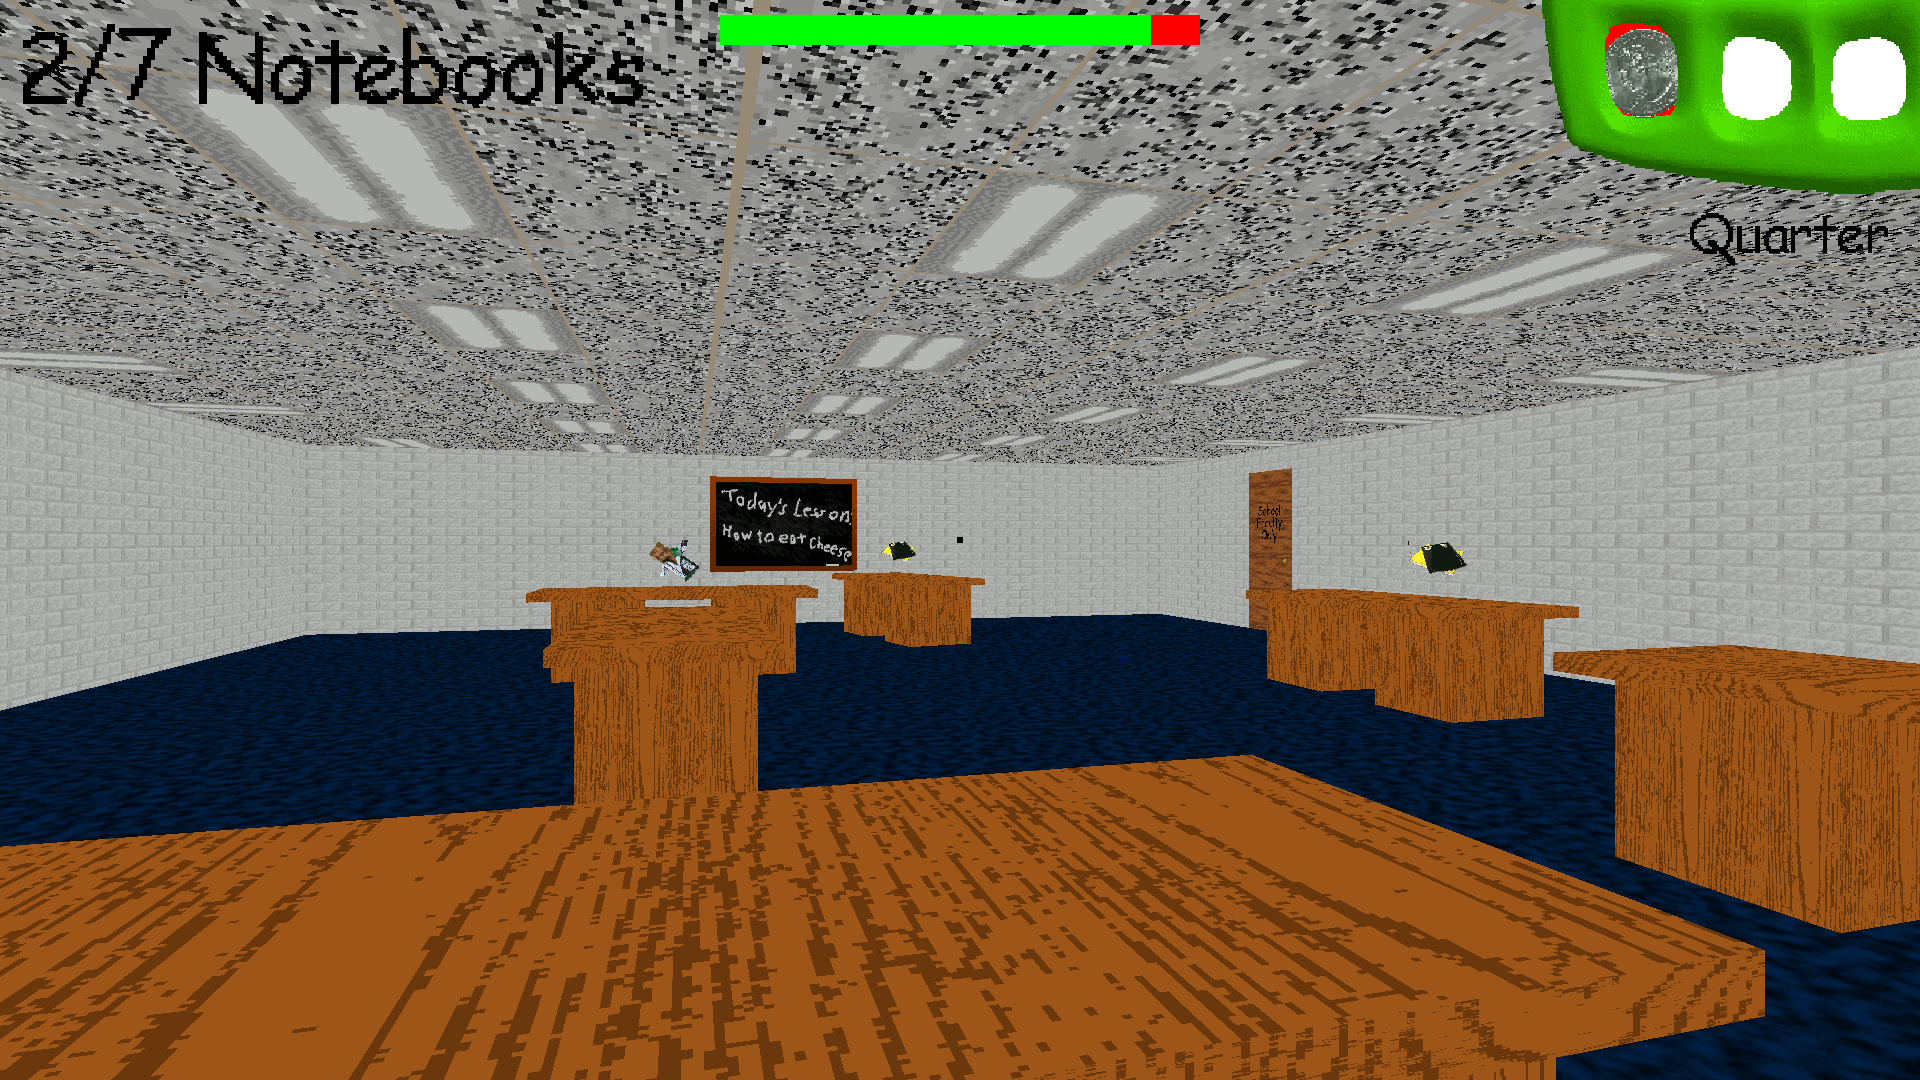 Baldi's Basics in Education and Learning by Basically Games for Meta Game  Jam 